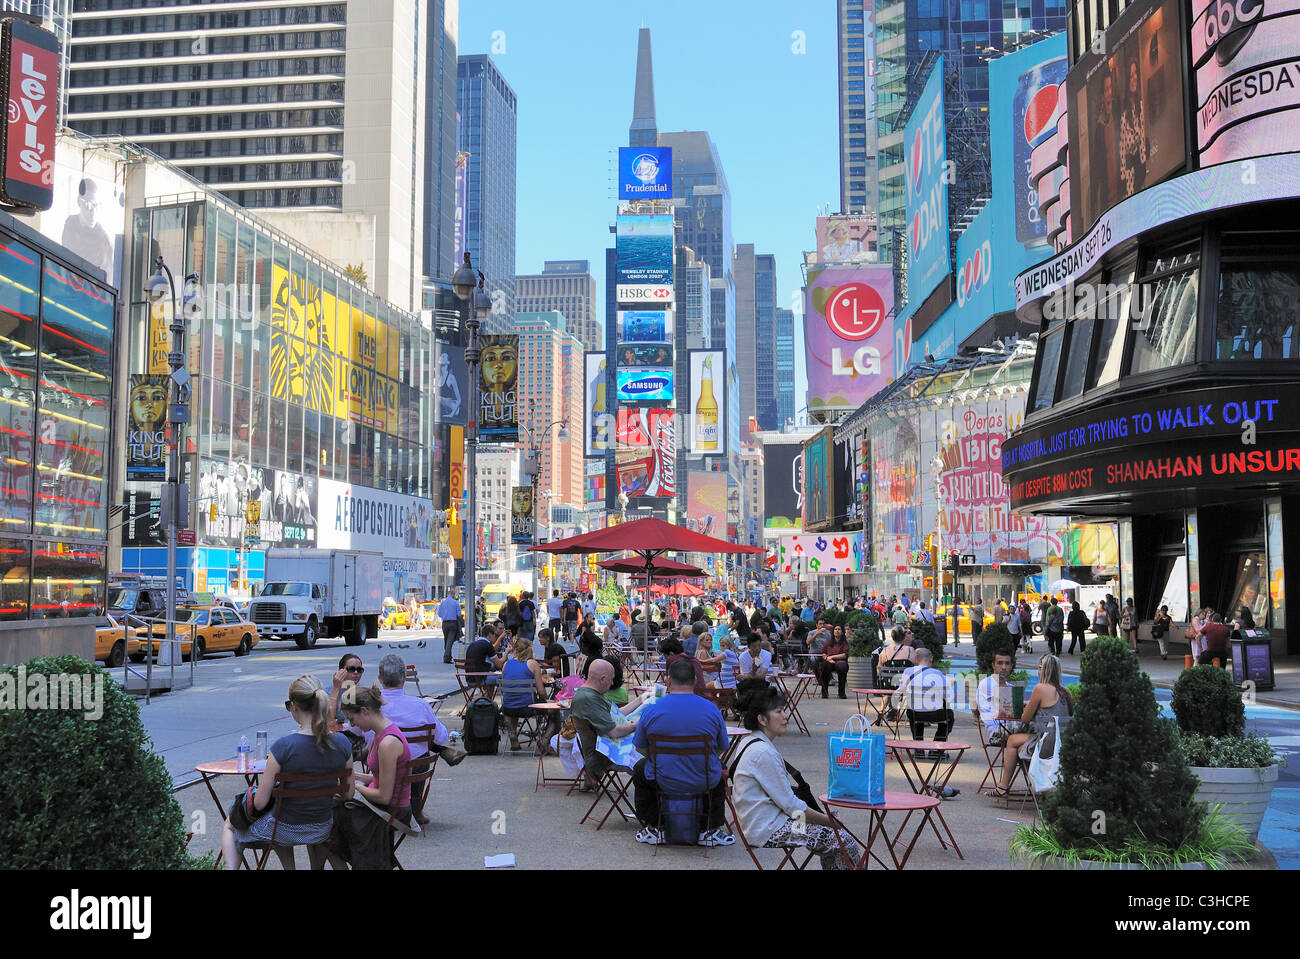 Crowds gather and relax pedestrian malls in Times Square New York City. Stock Photo